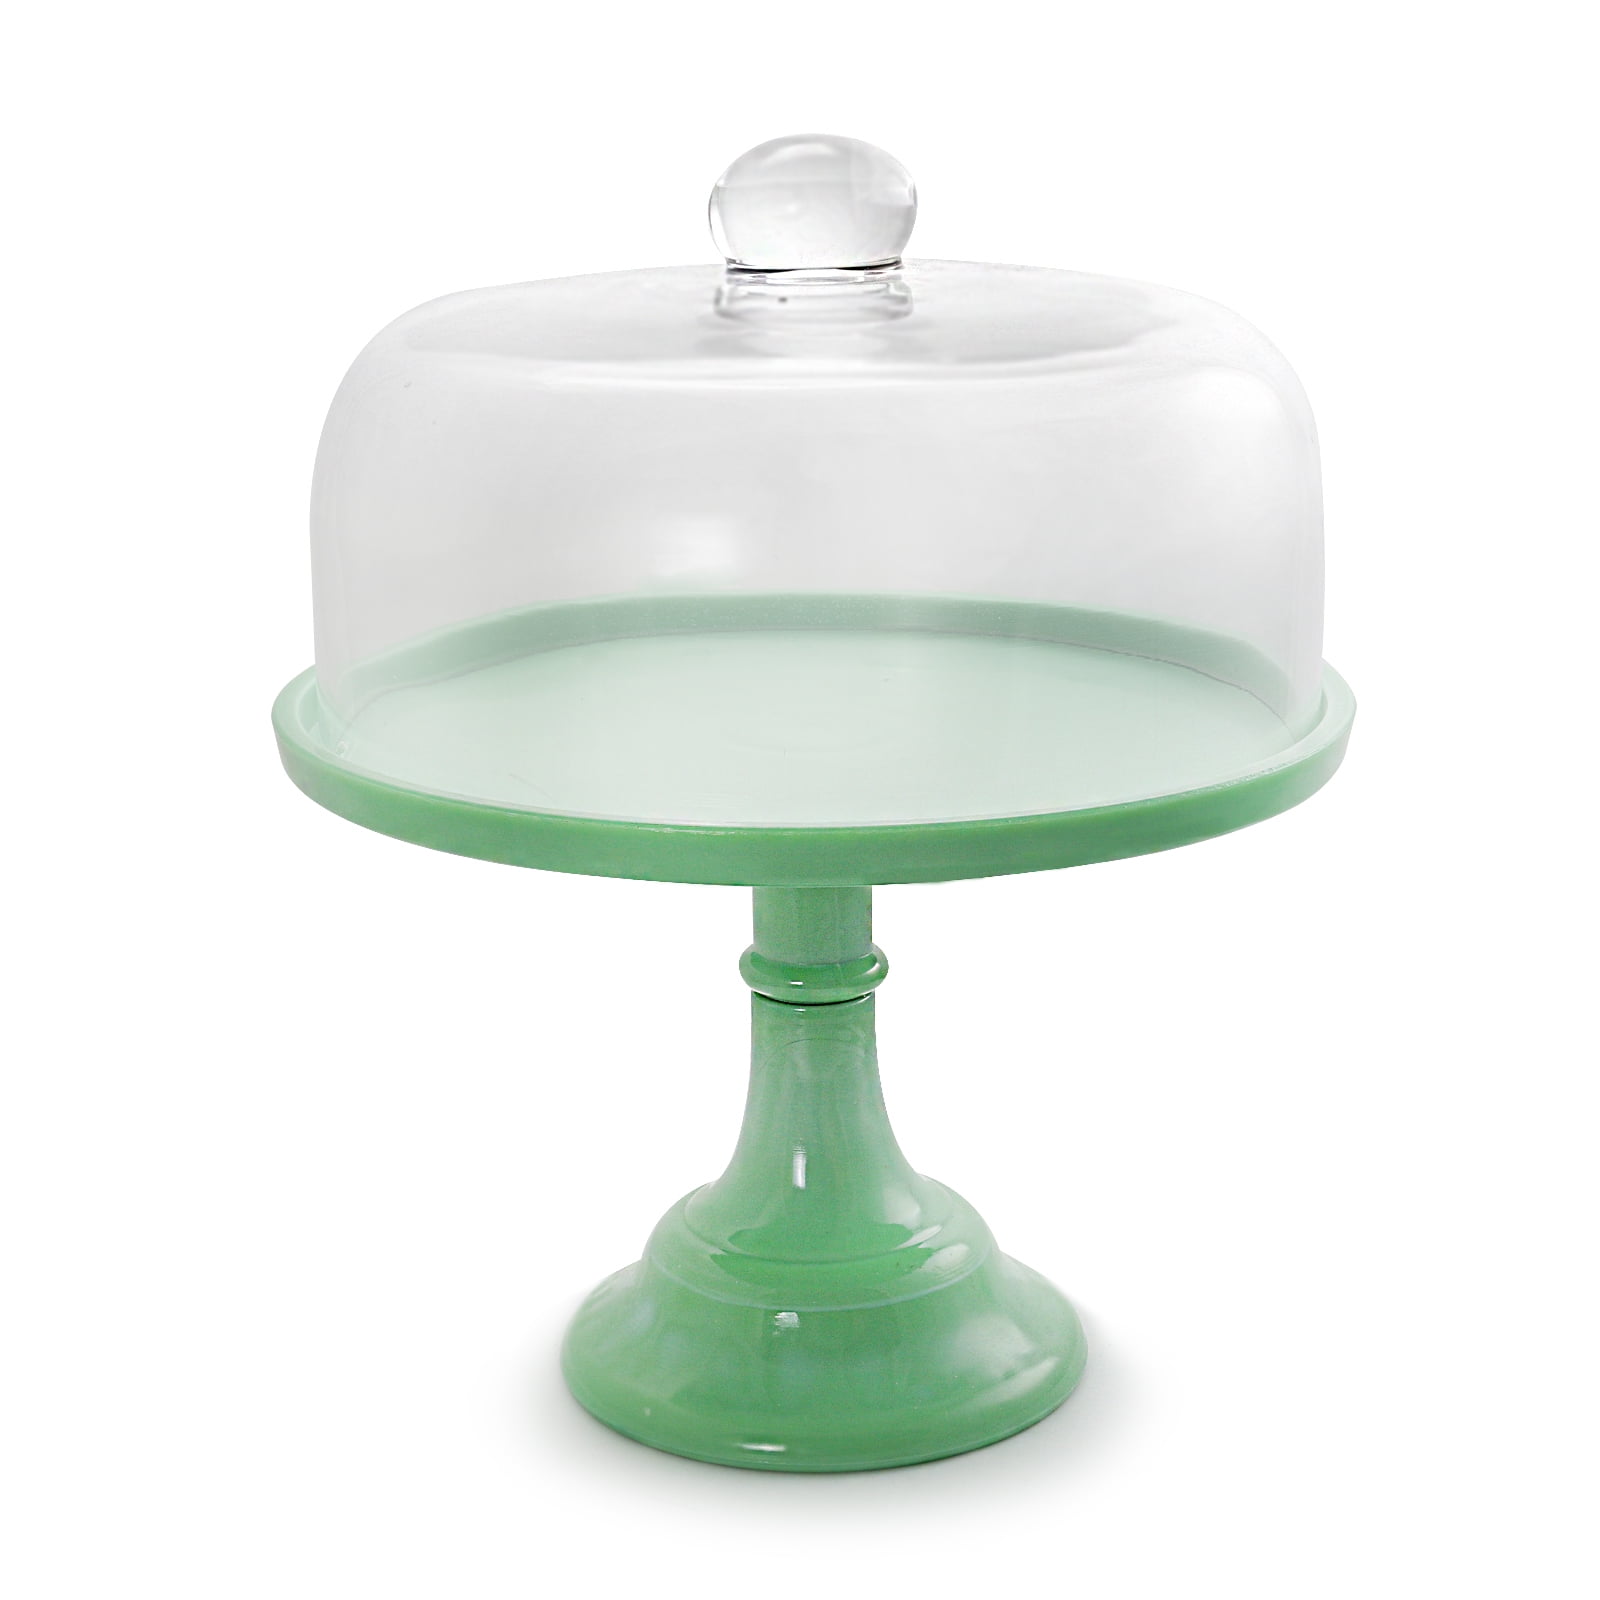 TIMELESS BEAUTY 10 CAKE STAND DOME JADITE GREEN THE PIONEER WOMAN 